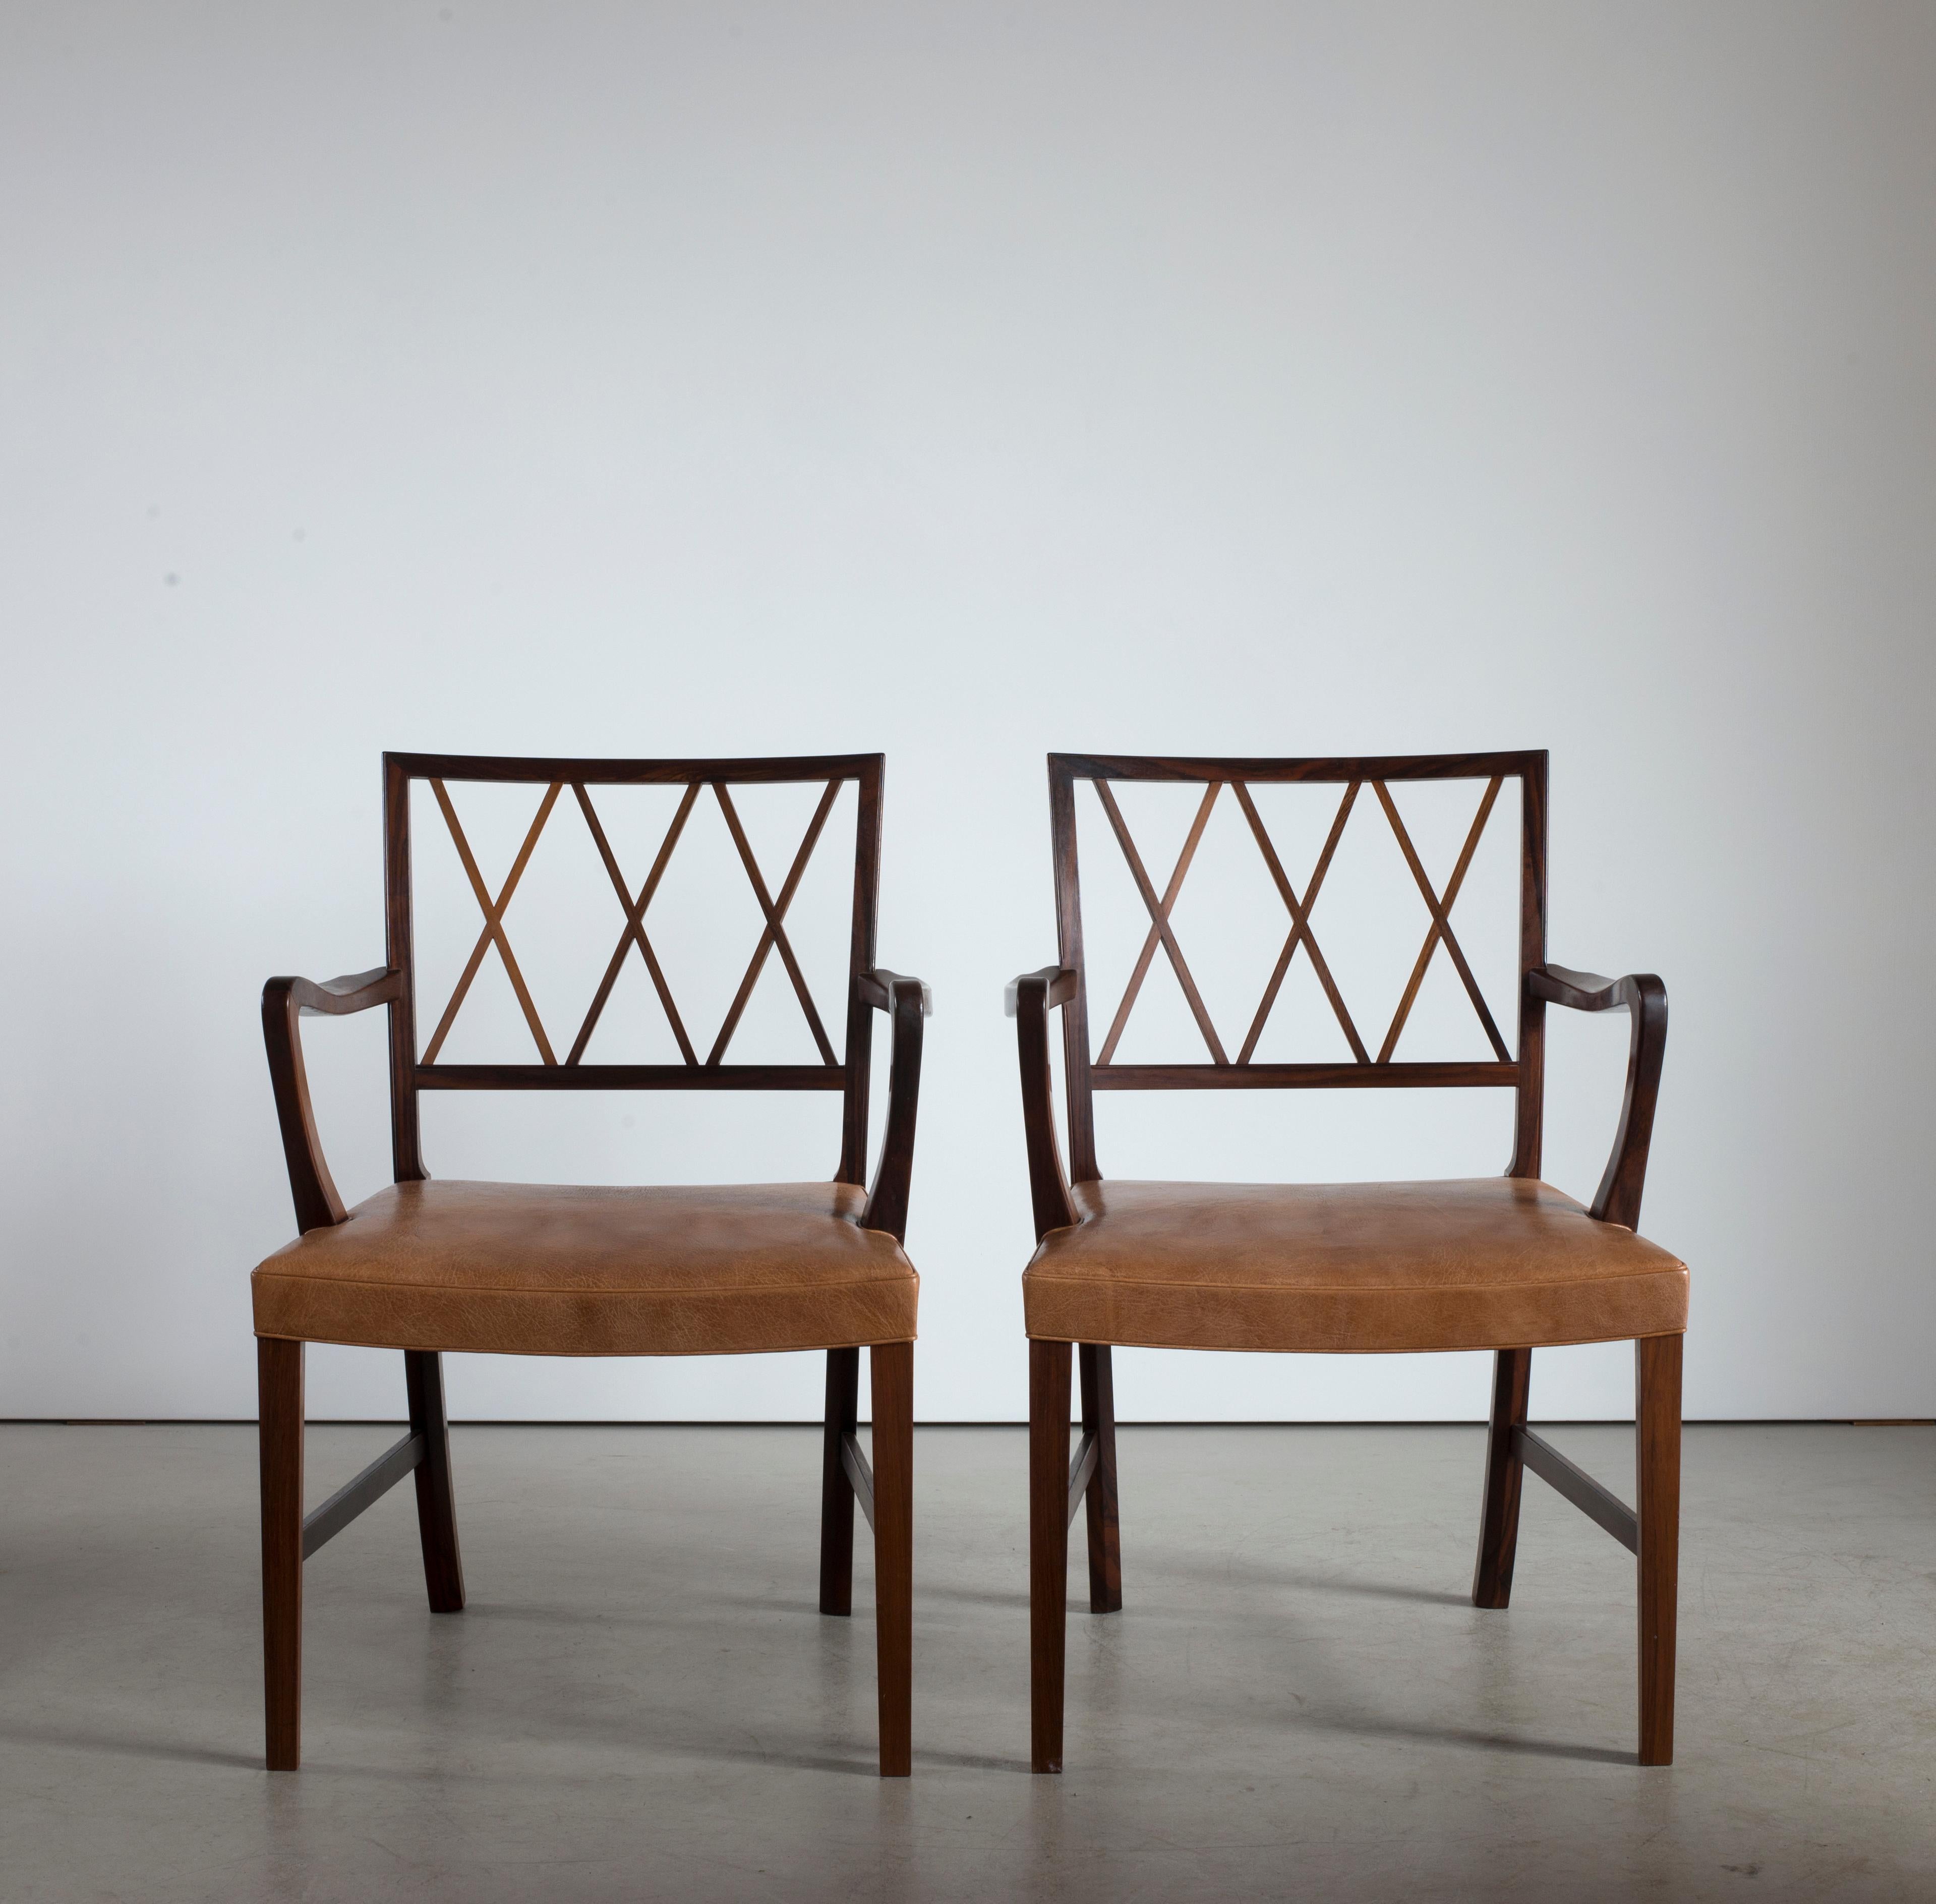 Ole Wanscher pair of armchairs in rosewood and leather. Executed by A. J. Iversen, Copenhagen, Denmark.